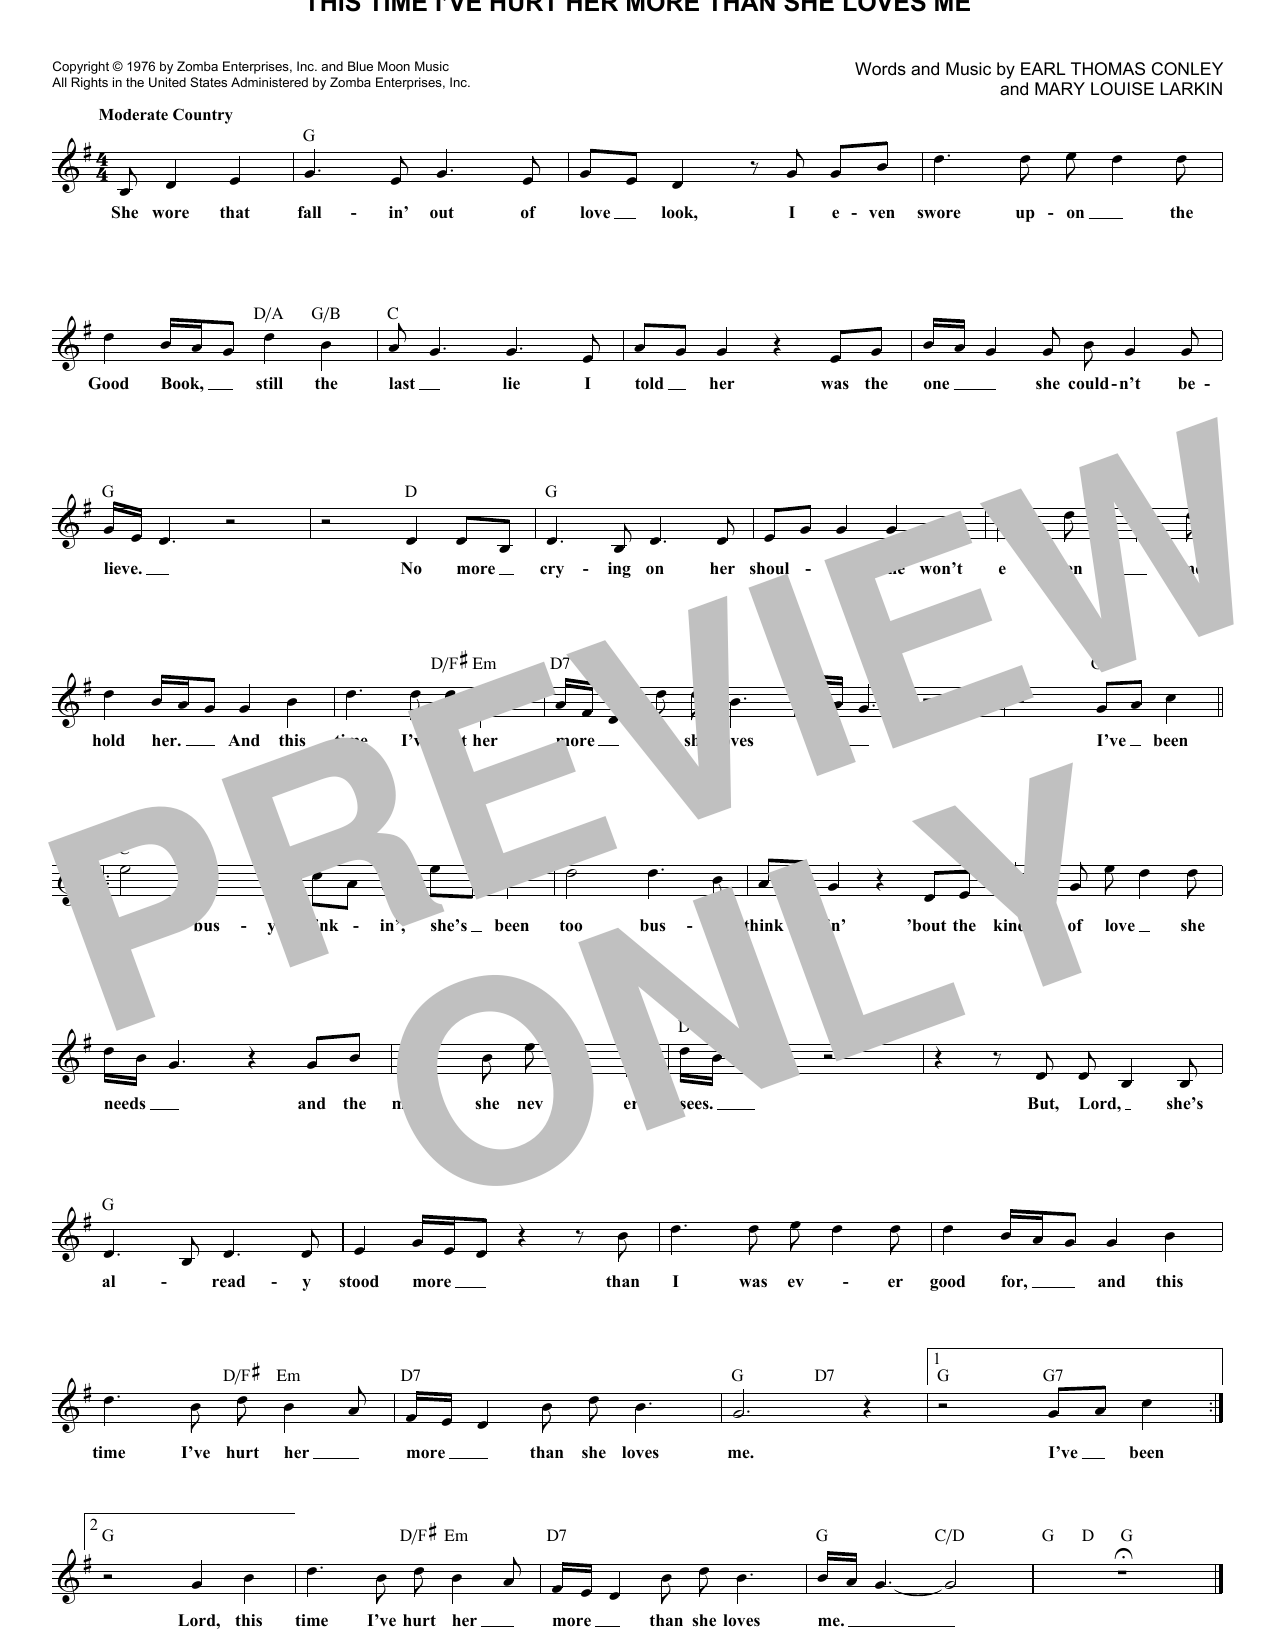 Download Conway Twitty This Time I've Hurt Her More Than She L Sheet Music